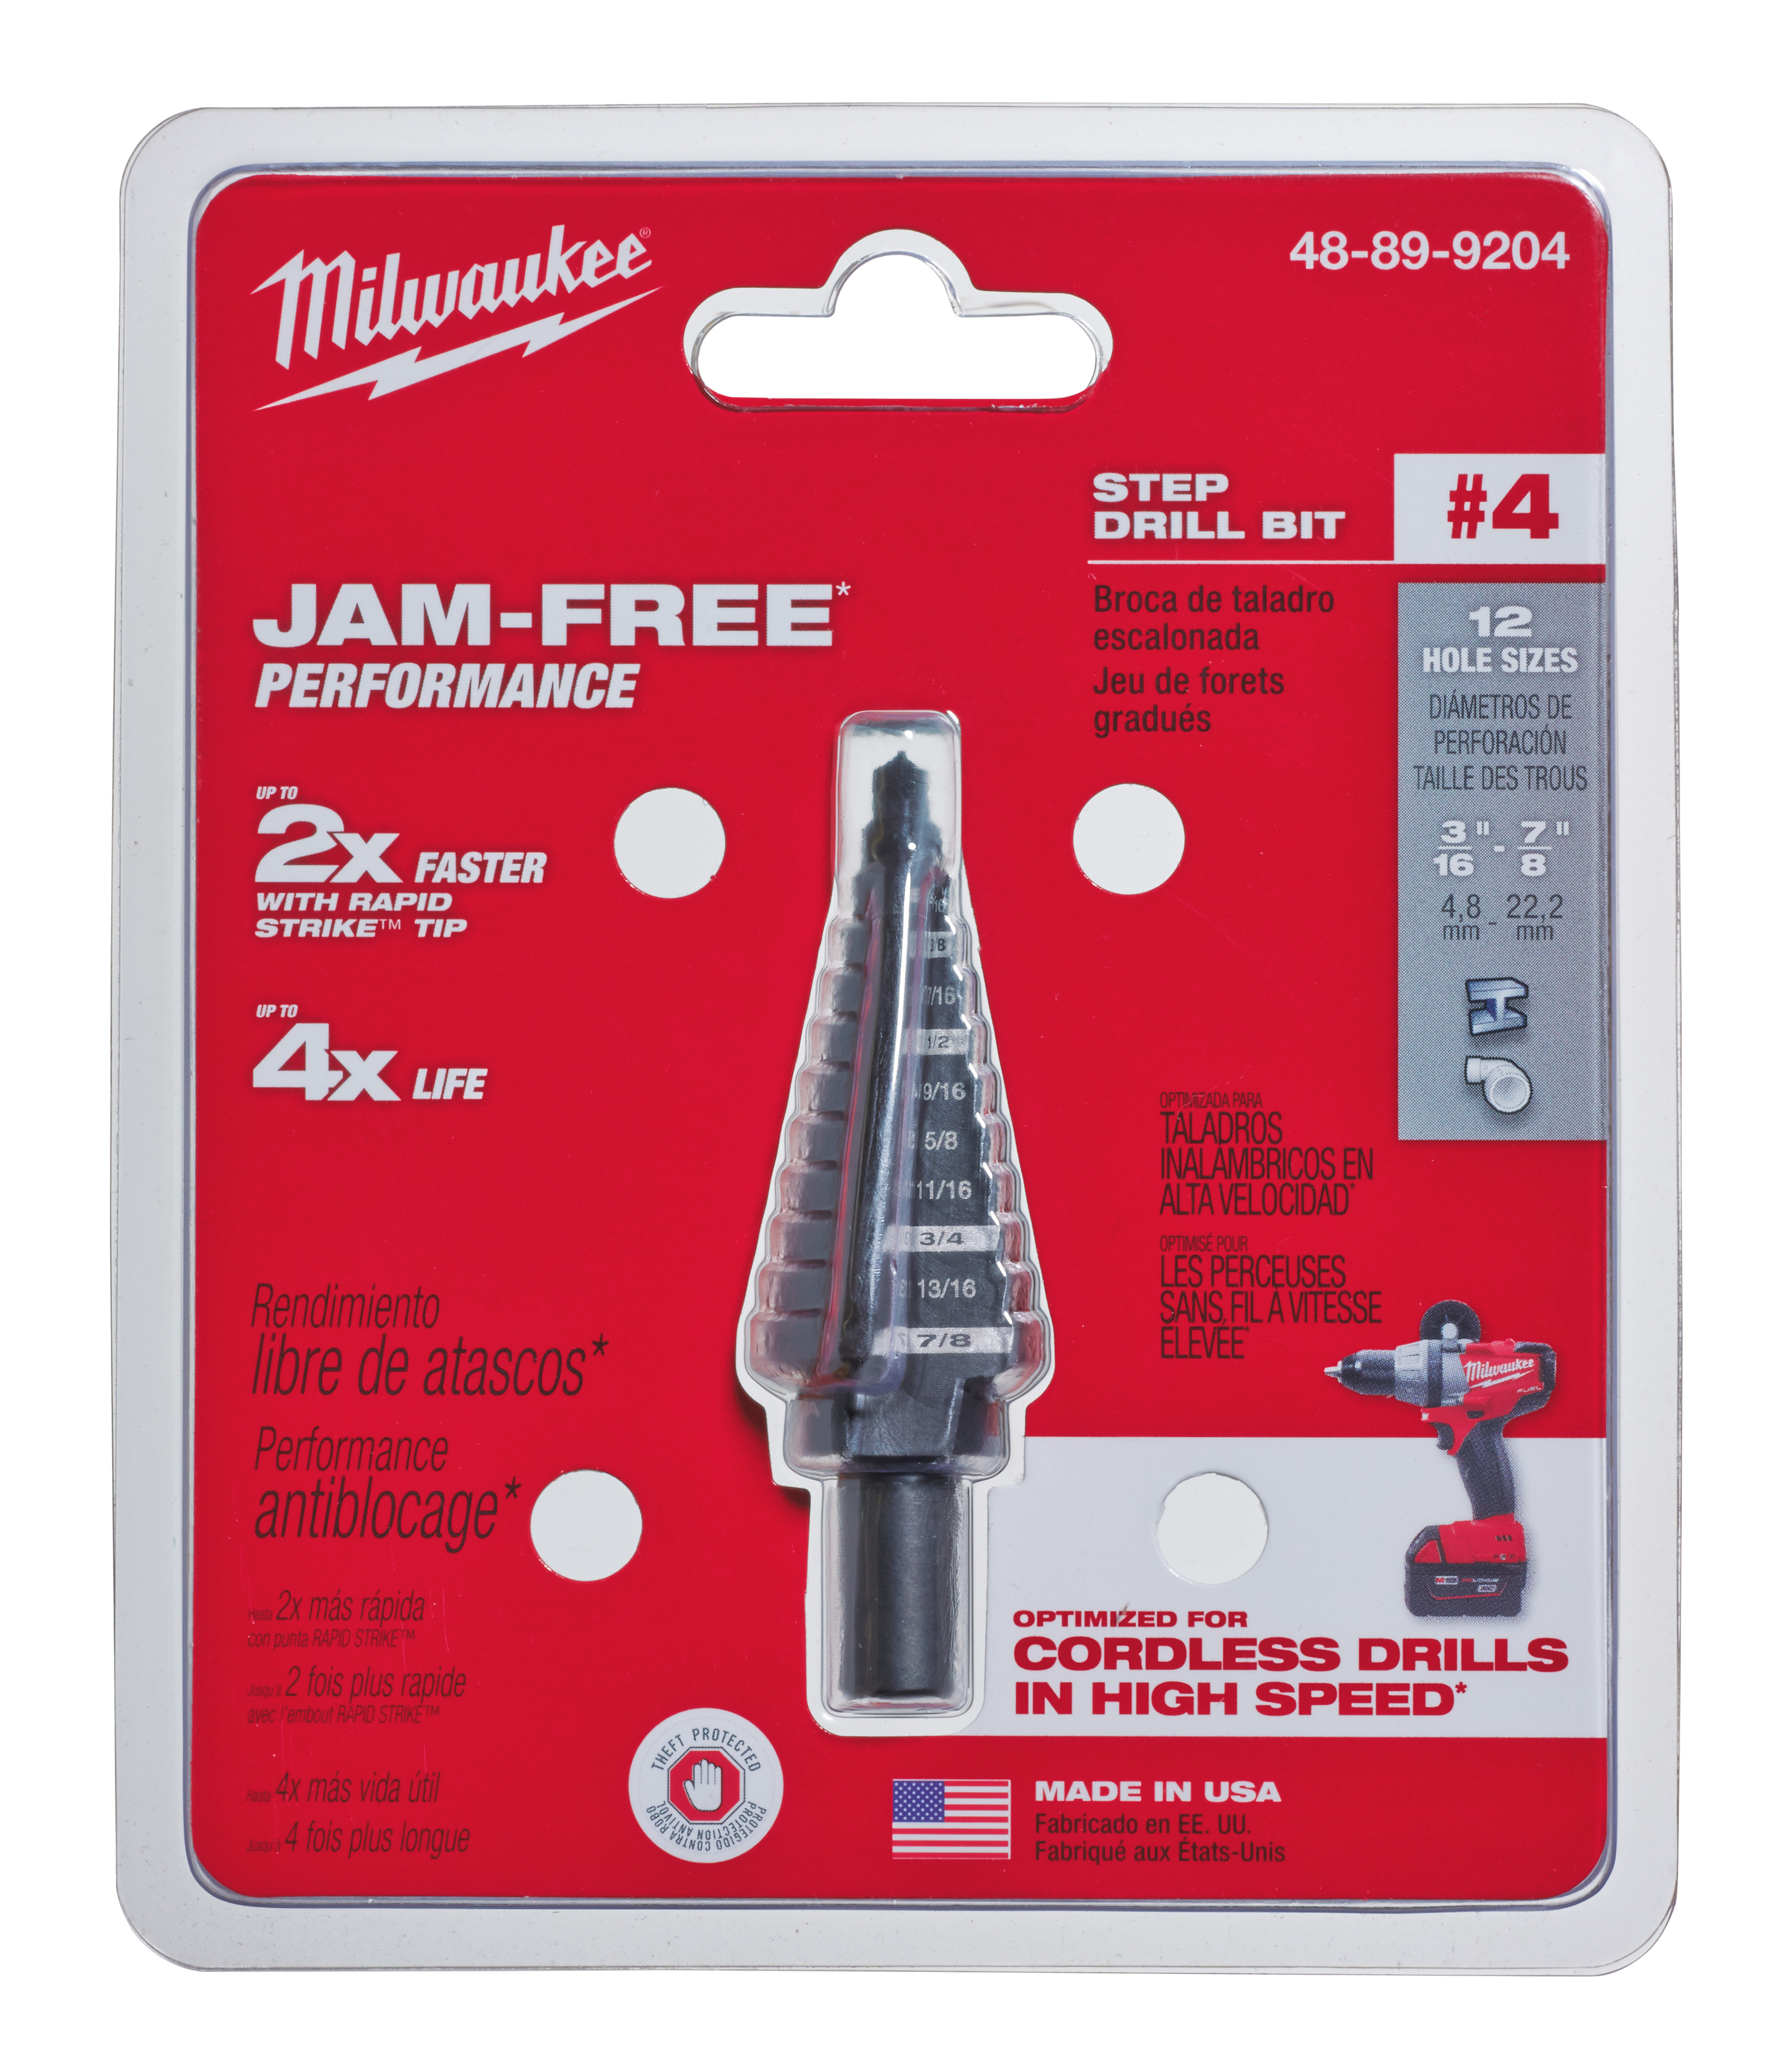 Milwaukee® step drill bits with jam-free performance feature a dual-flute design delivering up to 2X faster hole times, up to 4X longer life and up to 50% more holes per battery charge than the competition. Ideal for drilling large and small-diameter holes in steel and plastic, these bits are optimized for cordless drills in high speed. The Rapid Strike™ tip allows for fast, accurate starts that generate less heat, resulting in longer bit tip life. Black oxide coating also enhances durability, hole quality and bit life. For user convenience and accuracy, each bit has laser-engraved reference marks you can see while drilling. The 3-flat Secure-Grip™ shank ensures a solid connection with the drill chuck. The #4 step drill bit has 12 hole sizes in 1/16 in. increments ranging from 3/16 in. to 7/8 in.. jam-free performance in high speed with most professional 18 Volt cordless drills with lithium-ion battery technology.